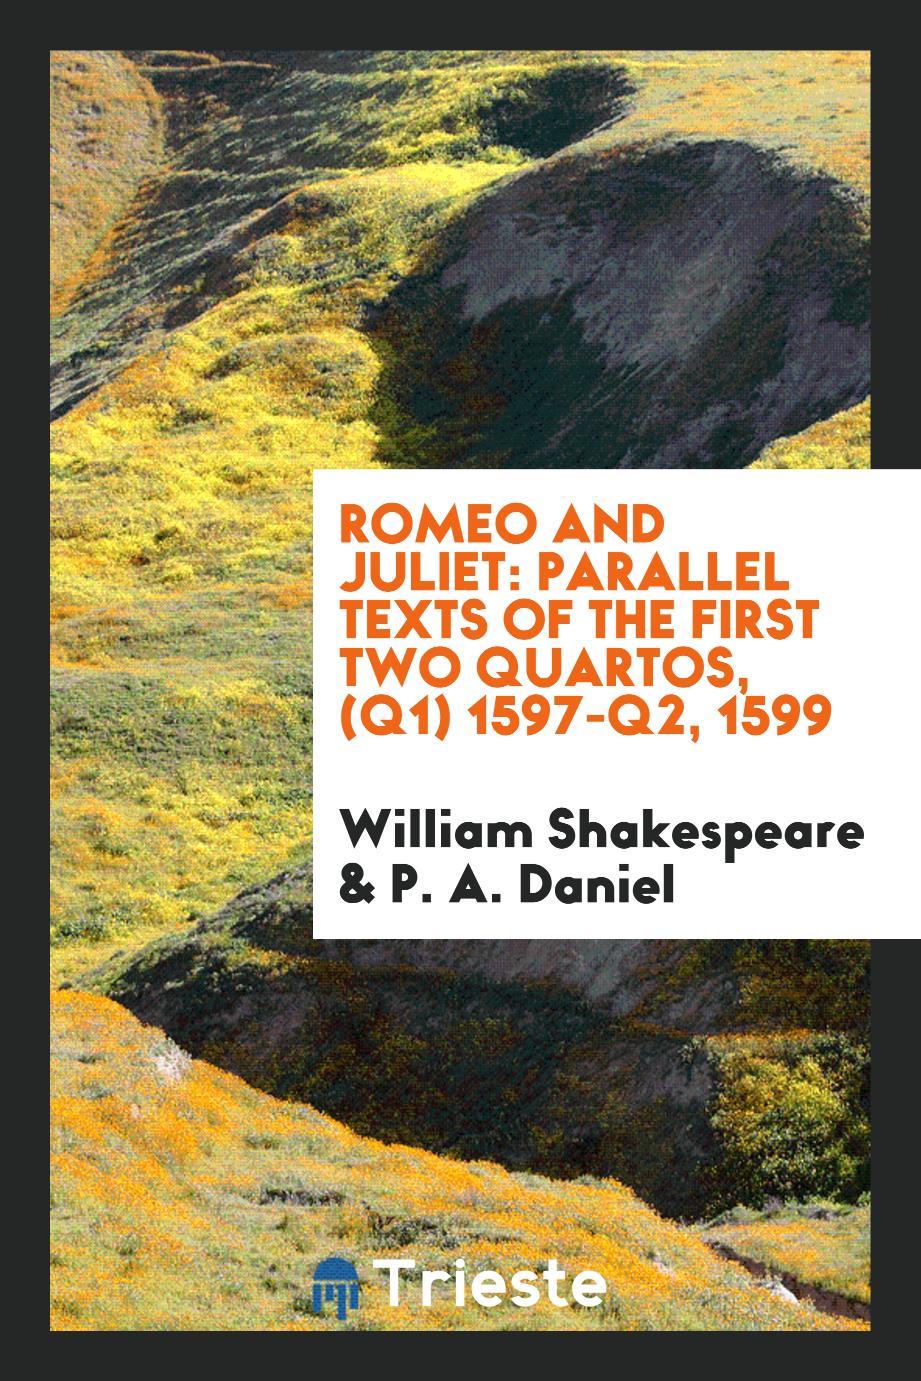 William Shakespeare, P. A. Daniel - Romeo and Juliet: parallel texts of the first two quartos, (Q1) 1597-Q2, 1599